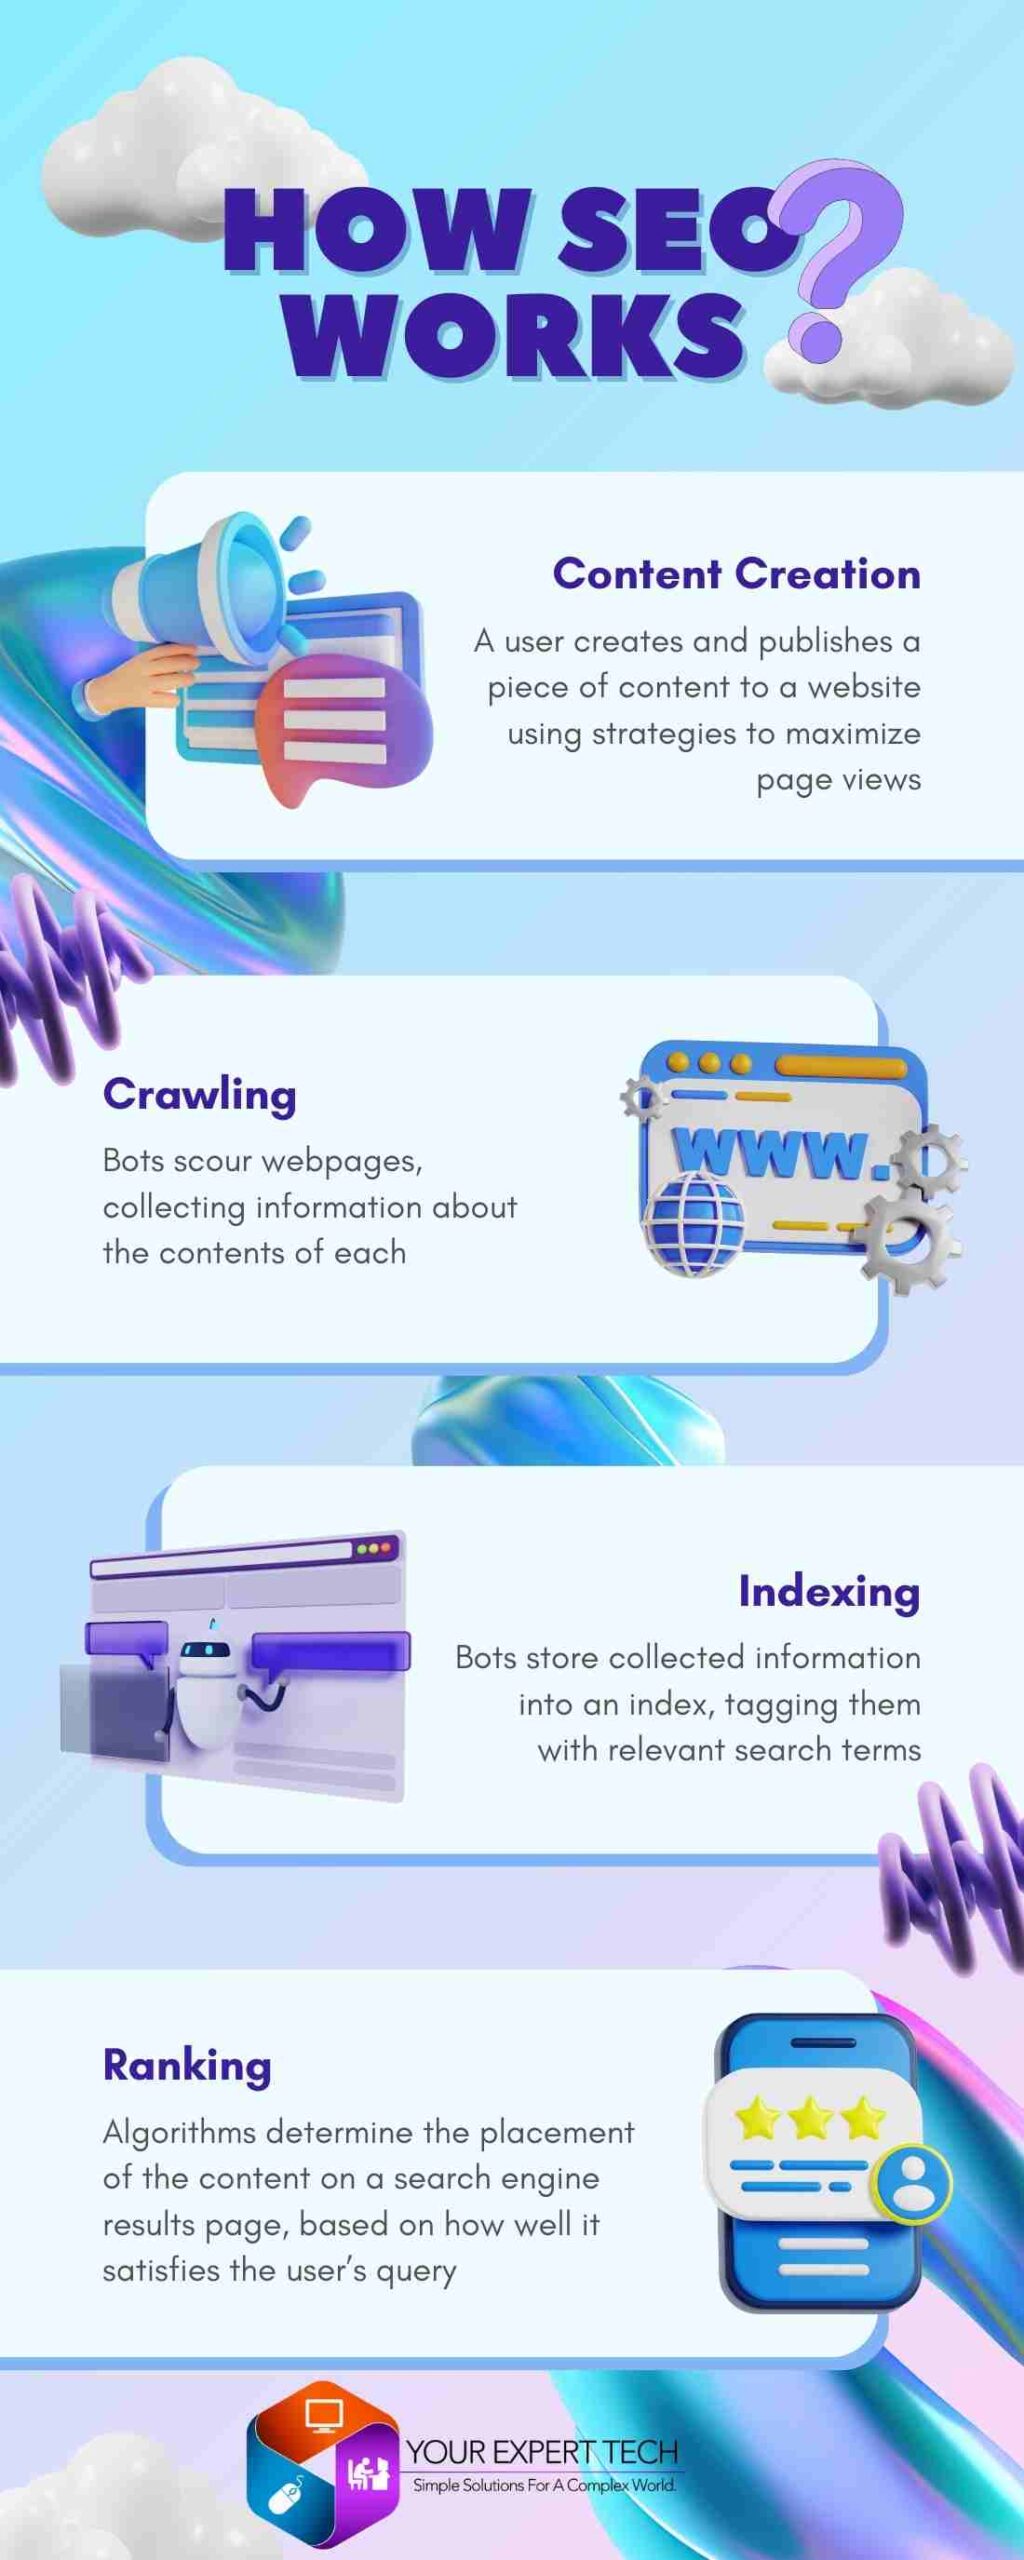 "Infographic illustrating the fundamentals of SEO, featuring sections on keyword research, content optimization, link building, and technical SEO enhancements."